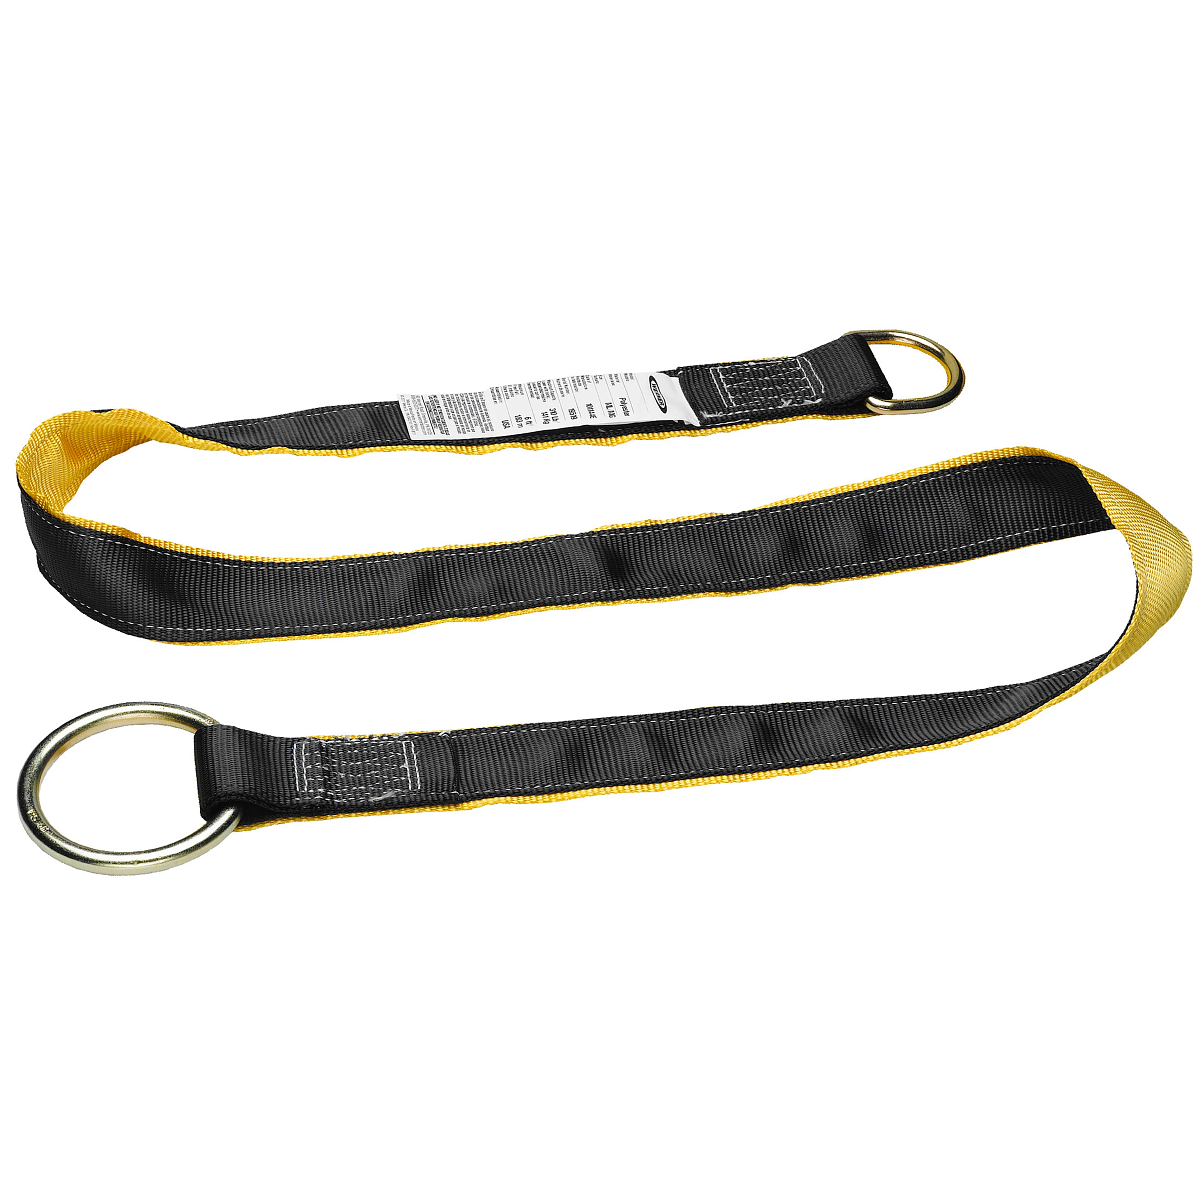 Cross-Arm Anchor Strap Lanyard with D Ring